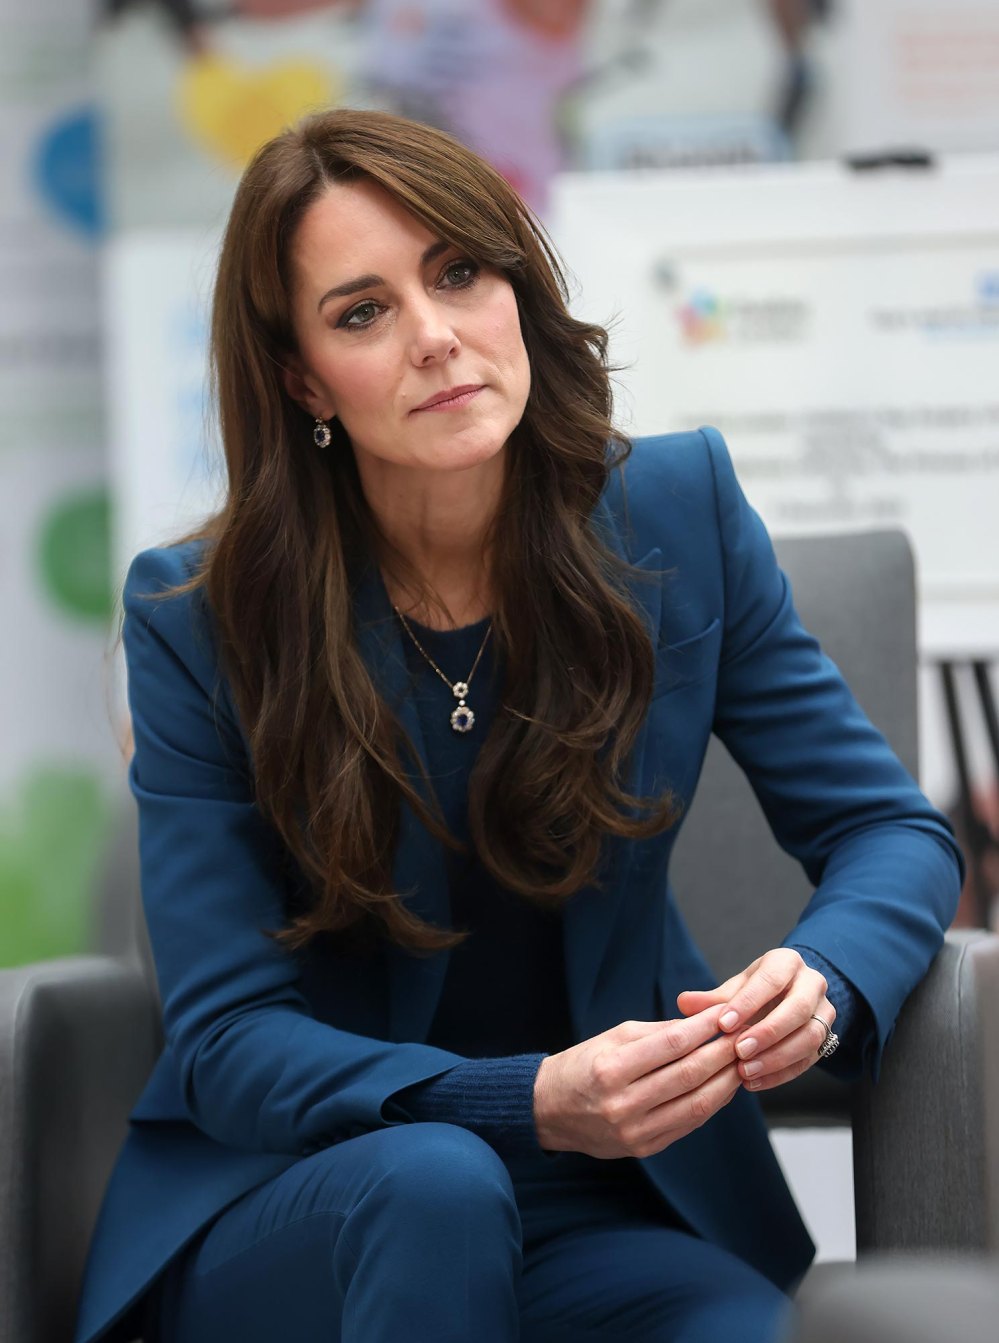 Kate Middleton's Cancer Announcement Was Rushed After Palace Was Threatened With a Leak: Report